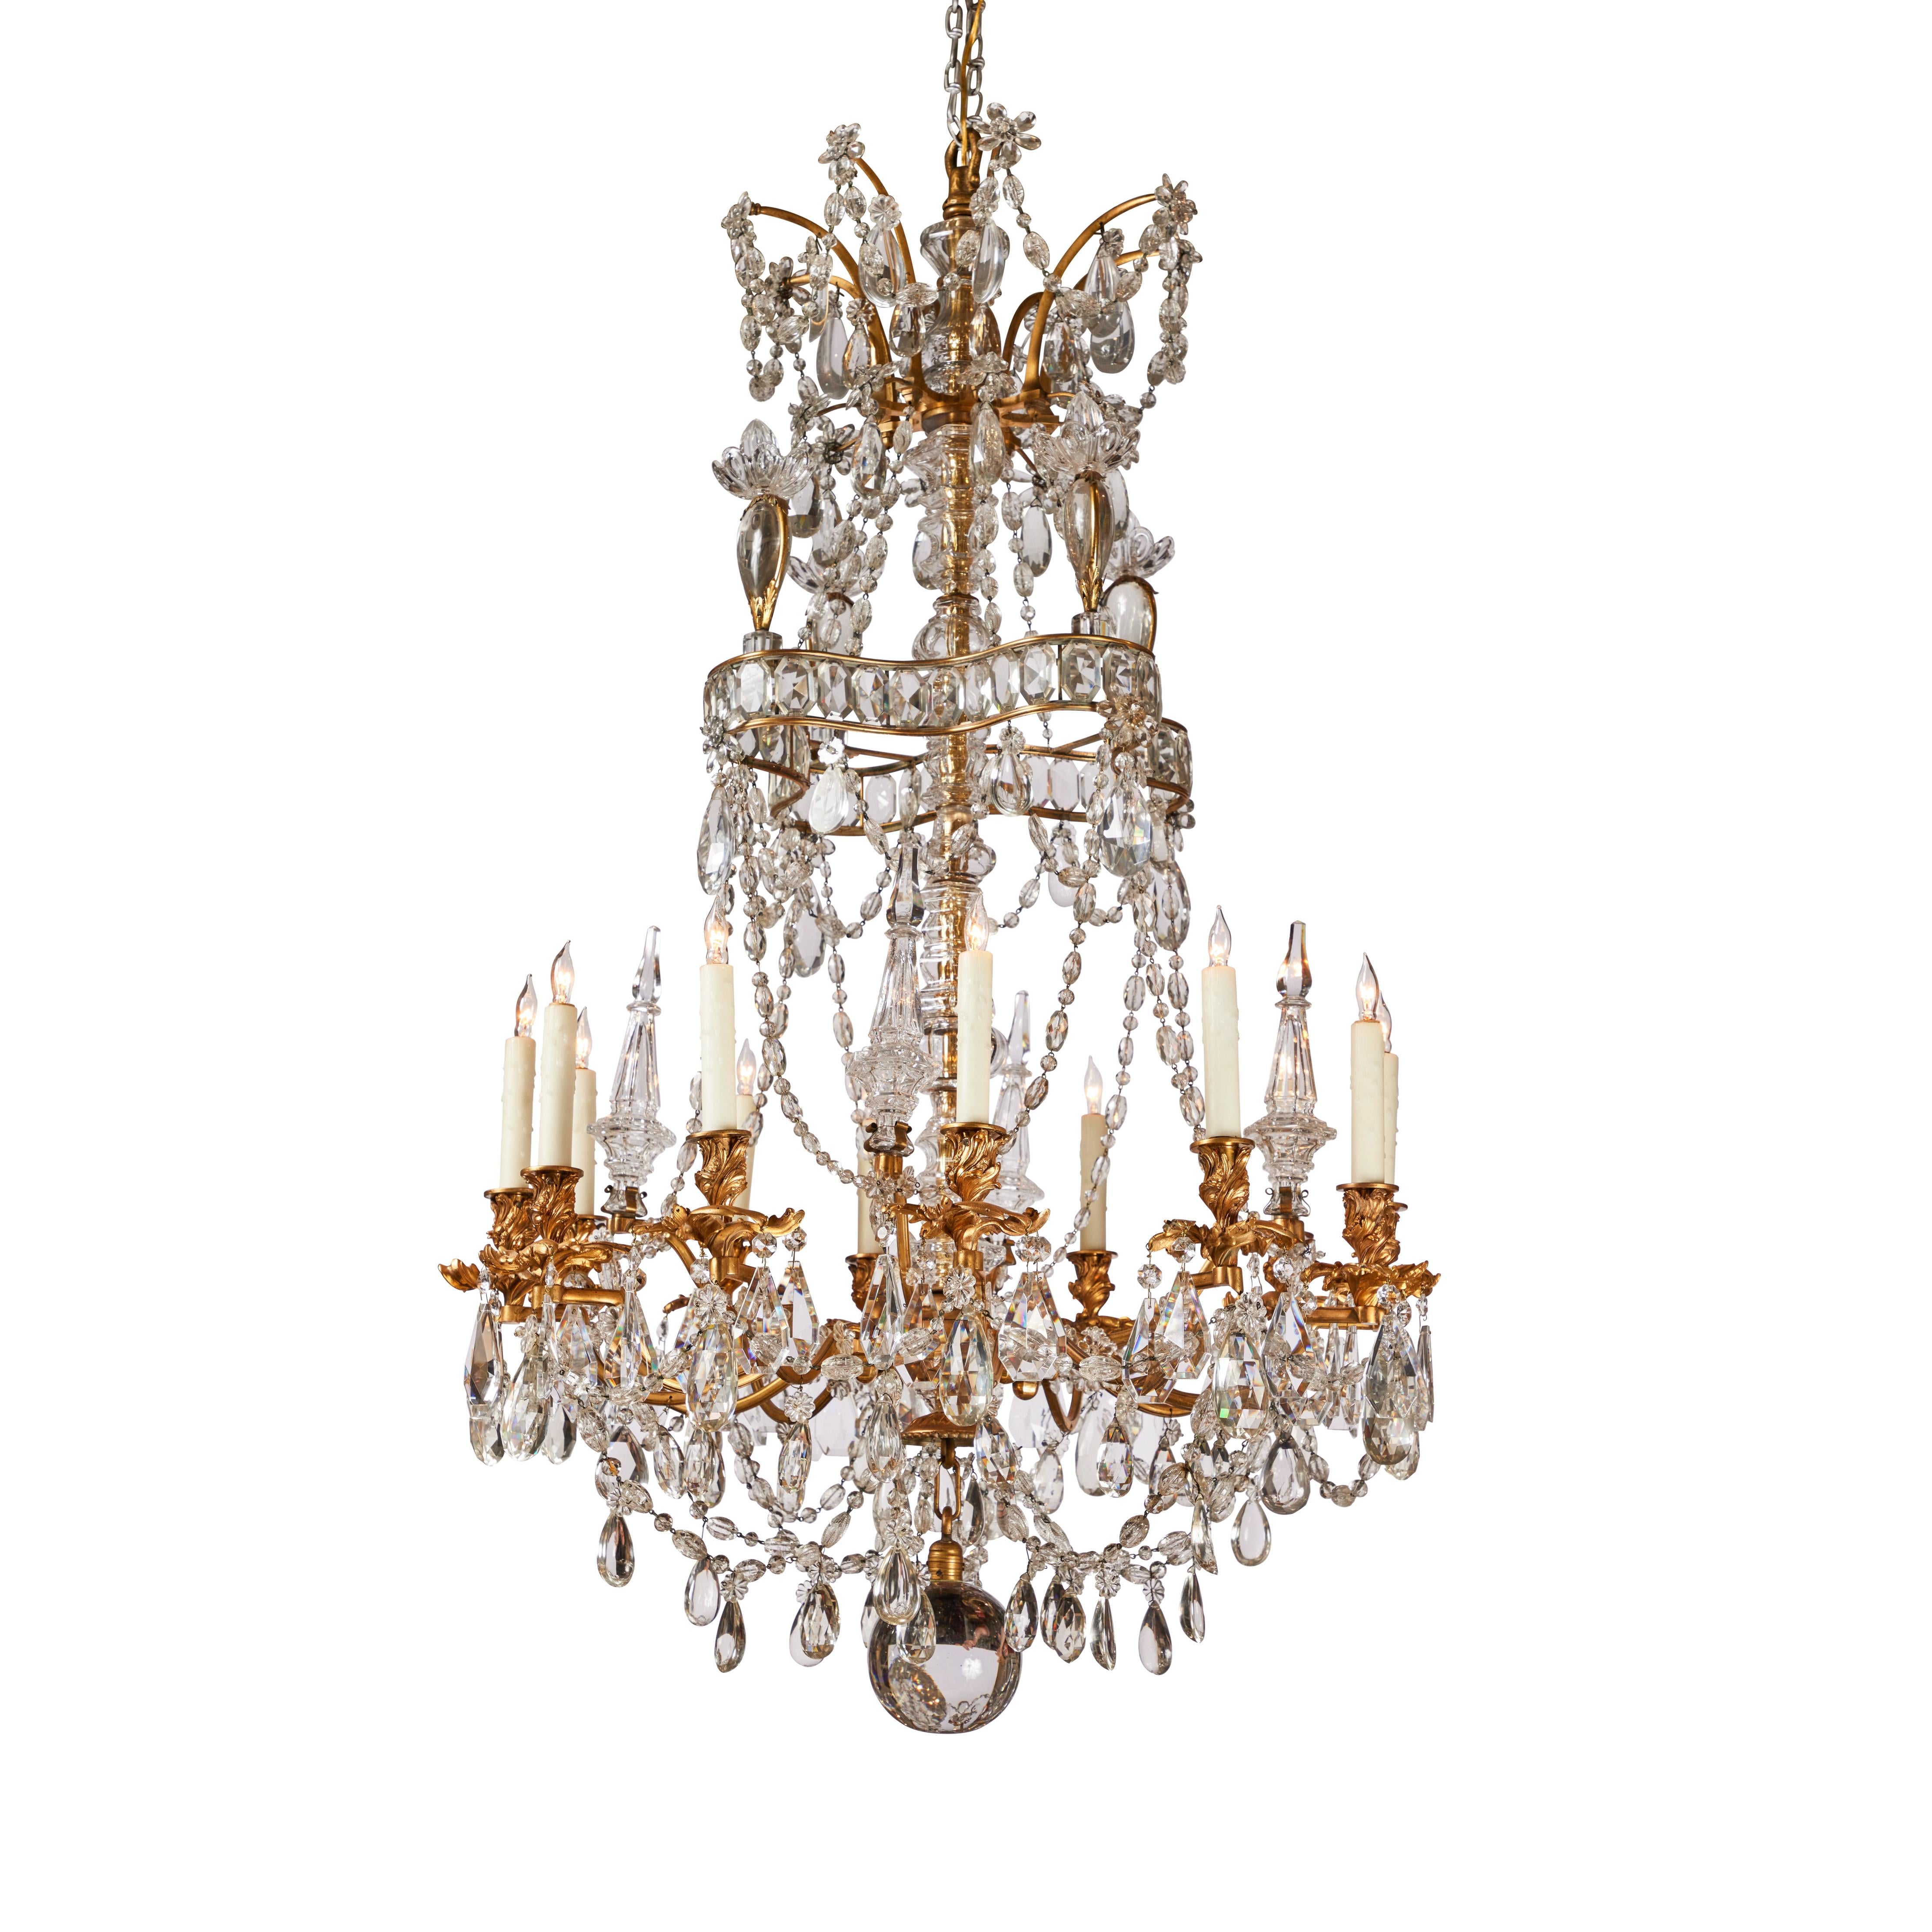 A elaborately appointed, hand-cast, gilt bronze carriage, 12-light chandelier decorated in multiple tiers of faceted and smooth polished crystal. Each of the arms terminating in remarkable, twisting, foliate-form bobesh and candle cups. The upper